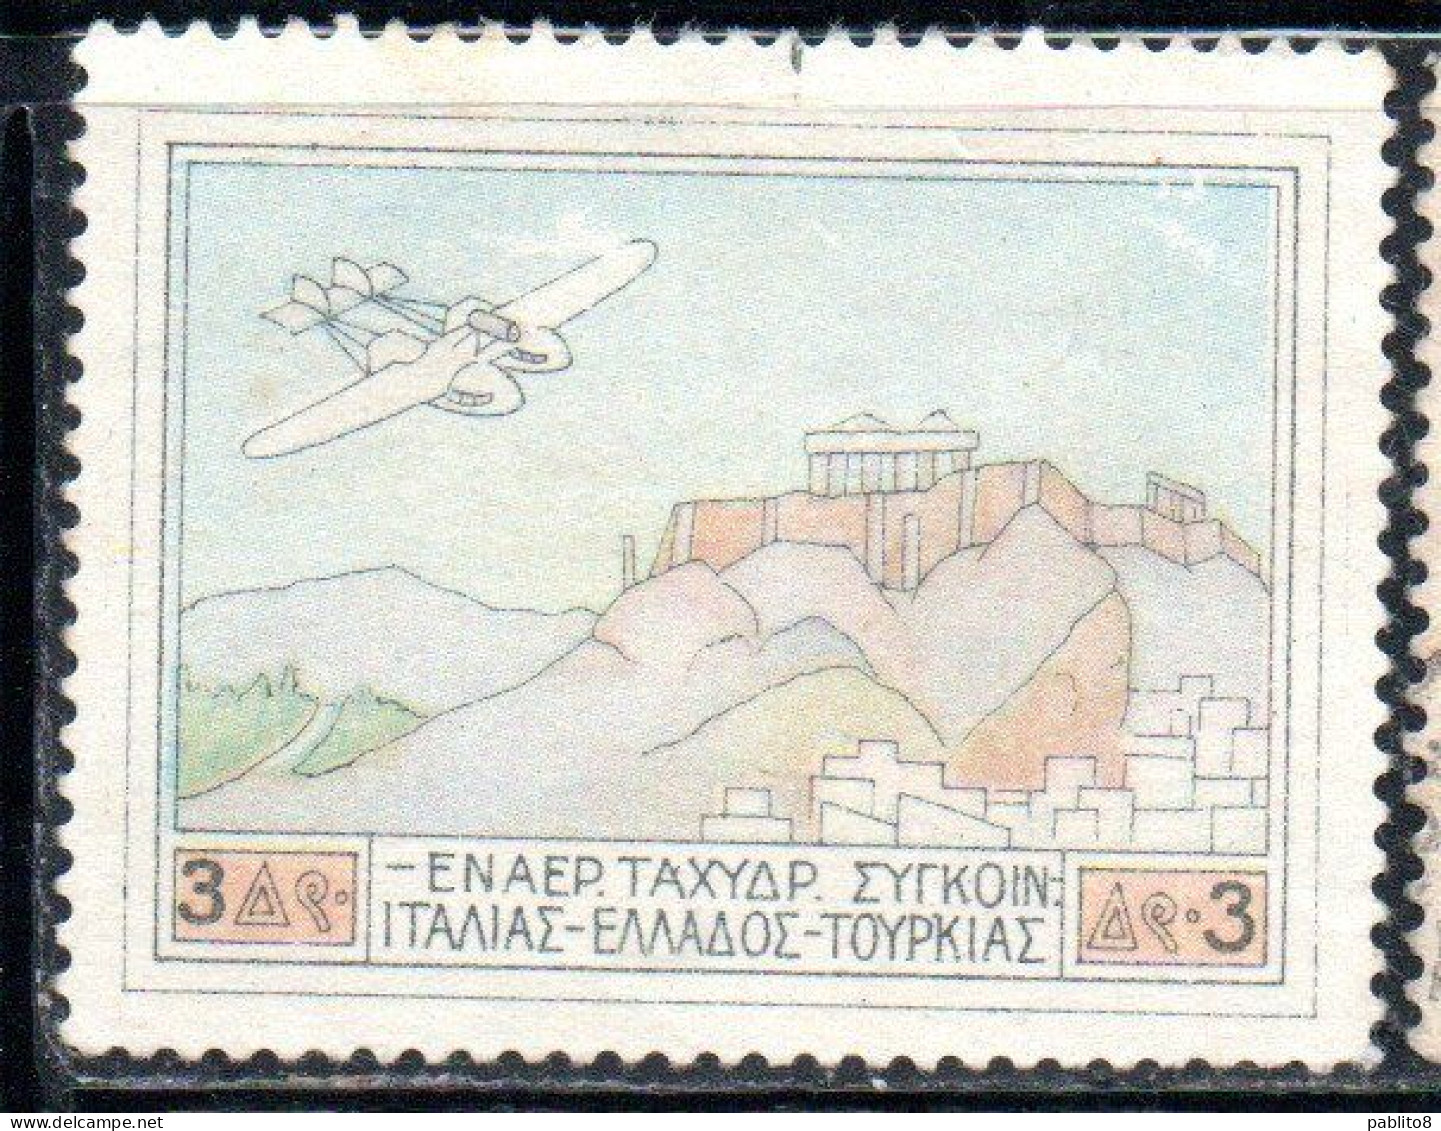 GREECE GRECIA ELLAS 1926 AIR POST MAIL AIRMAIL ITALY-TURKEY-RHODES SERVICE FLYING BOAT OVER ACROPOLIS 3d USED USATO - Gebruikt